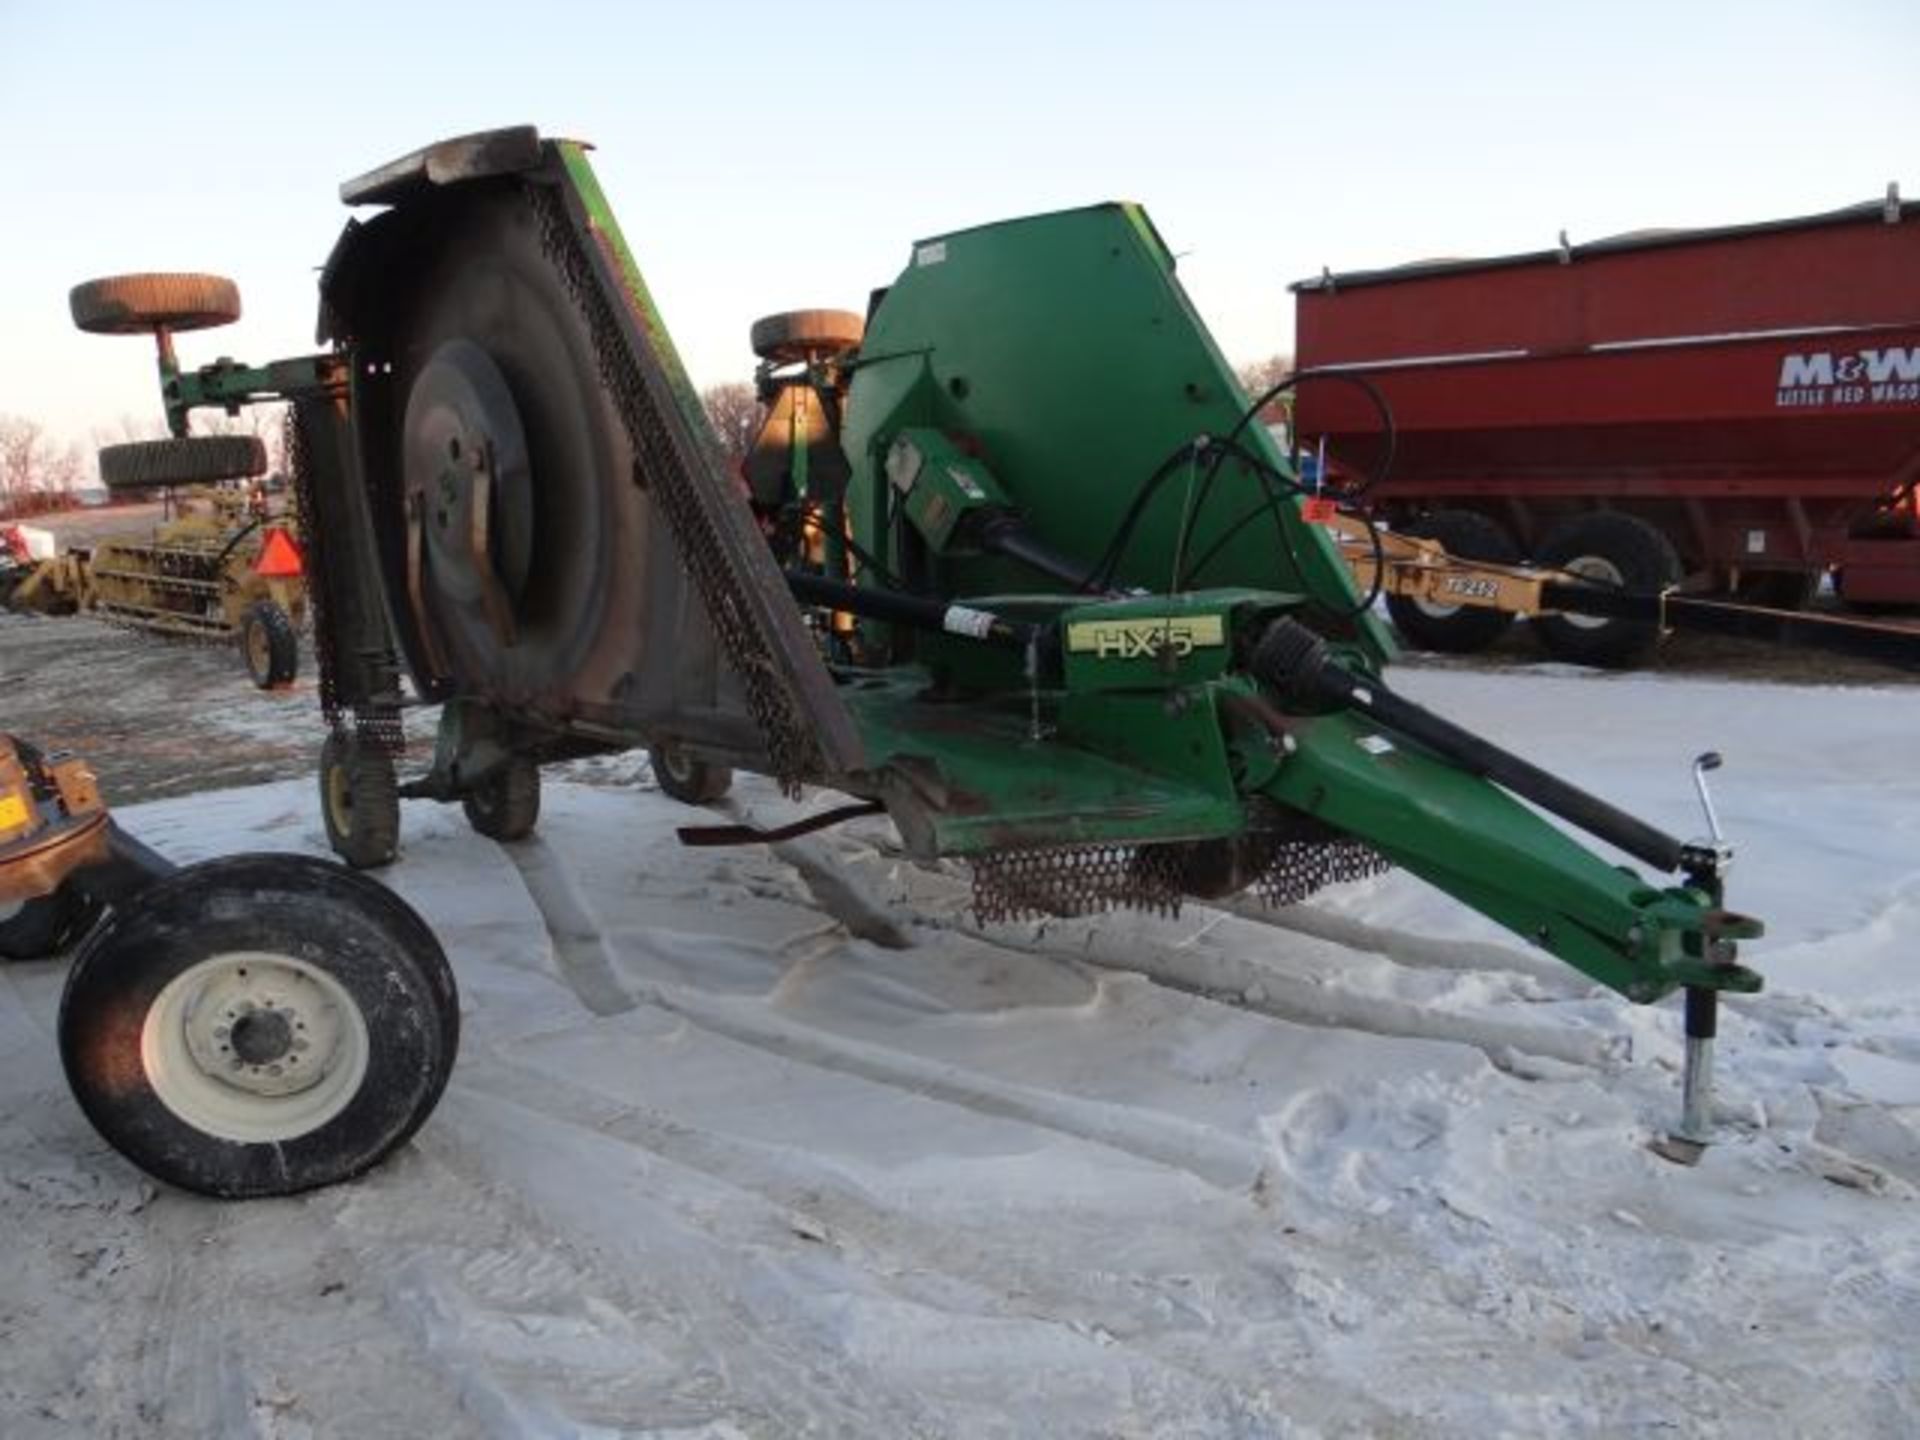 2003 JD HX15 Batwing Cutter #154663 Rotary Cutter, 1000 PTO, Laminated Tires, Rear Rubber Shield SN# - Image 2 of 2